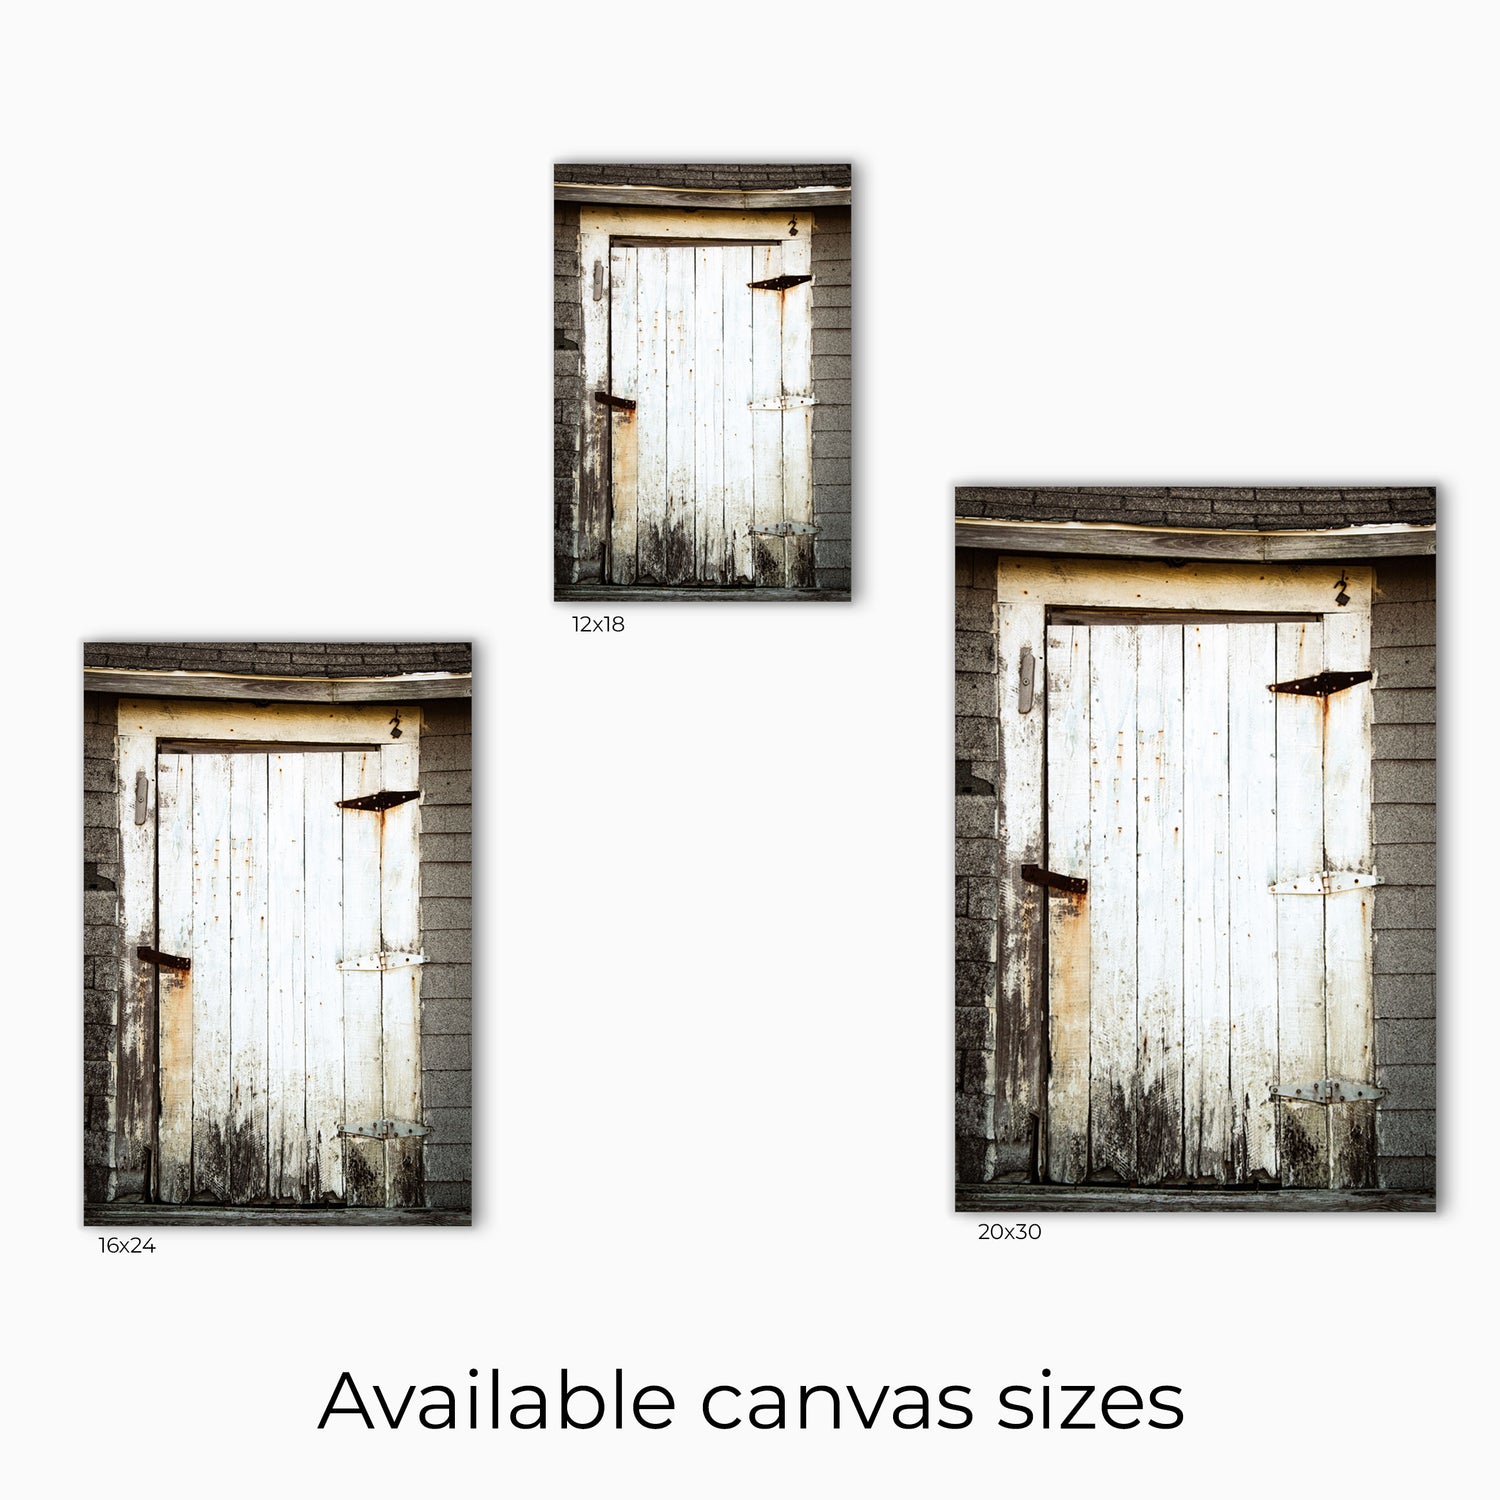 Visual representation of the canvas wall art print sizes available: 12x18, 16x24, and 20x30.